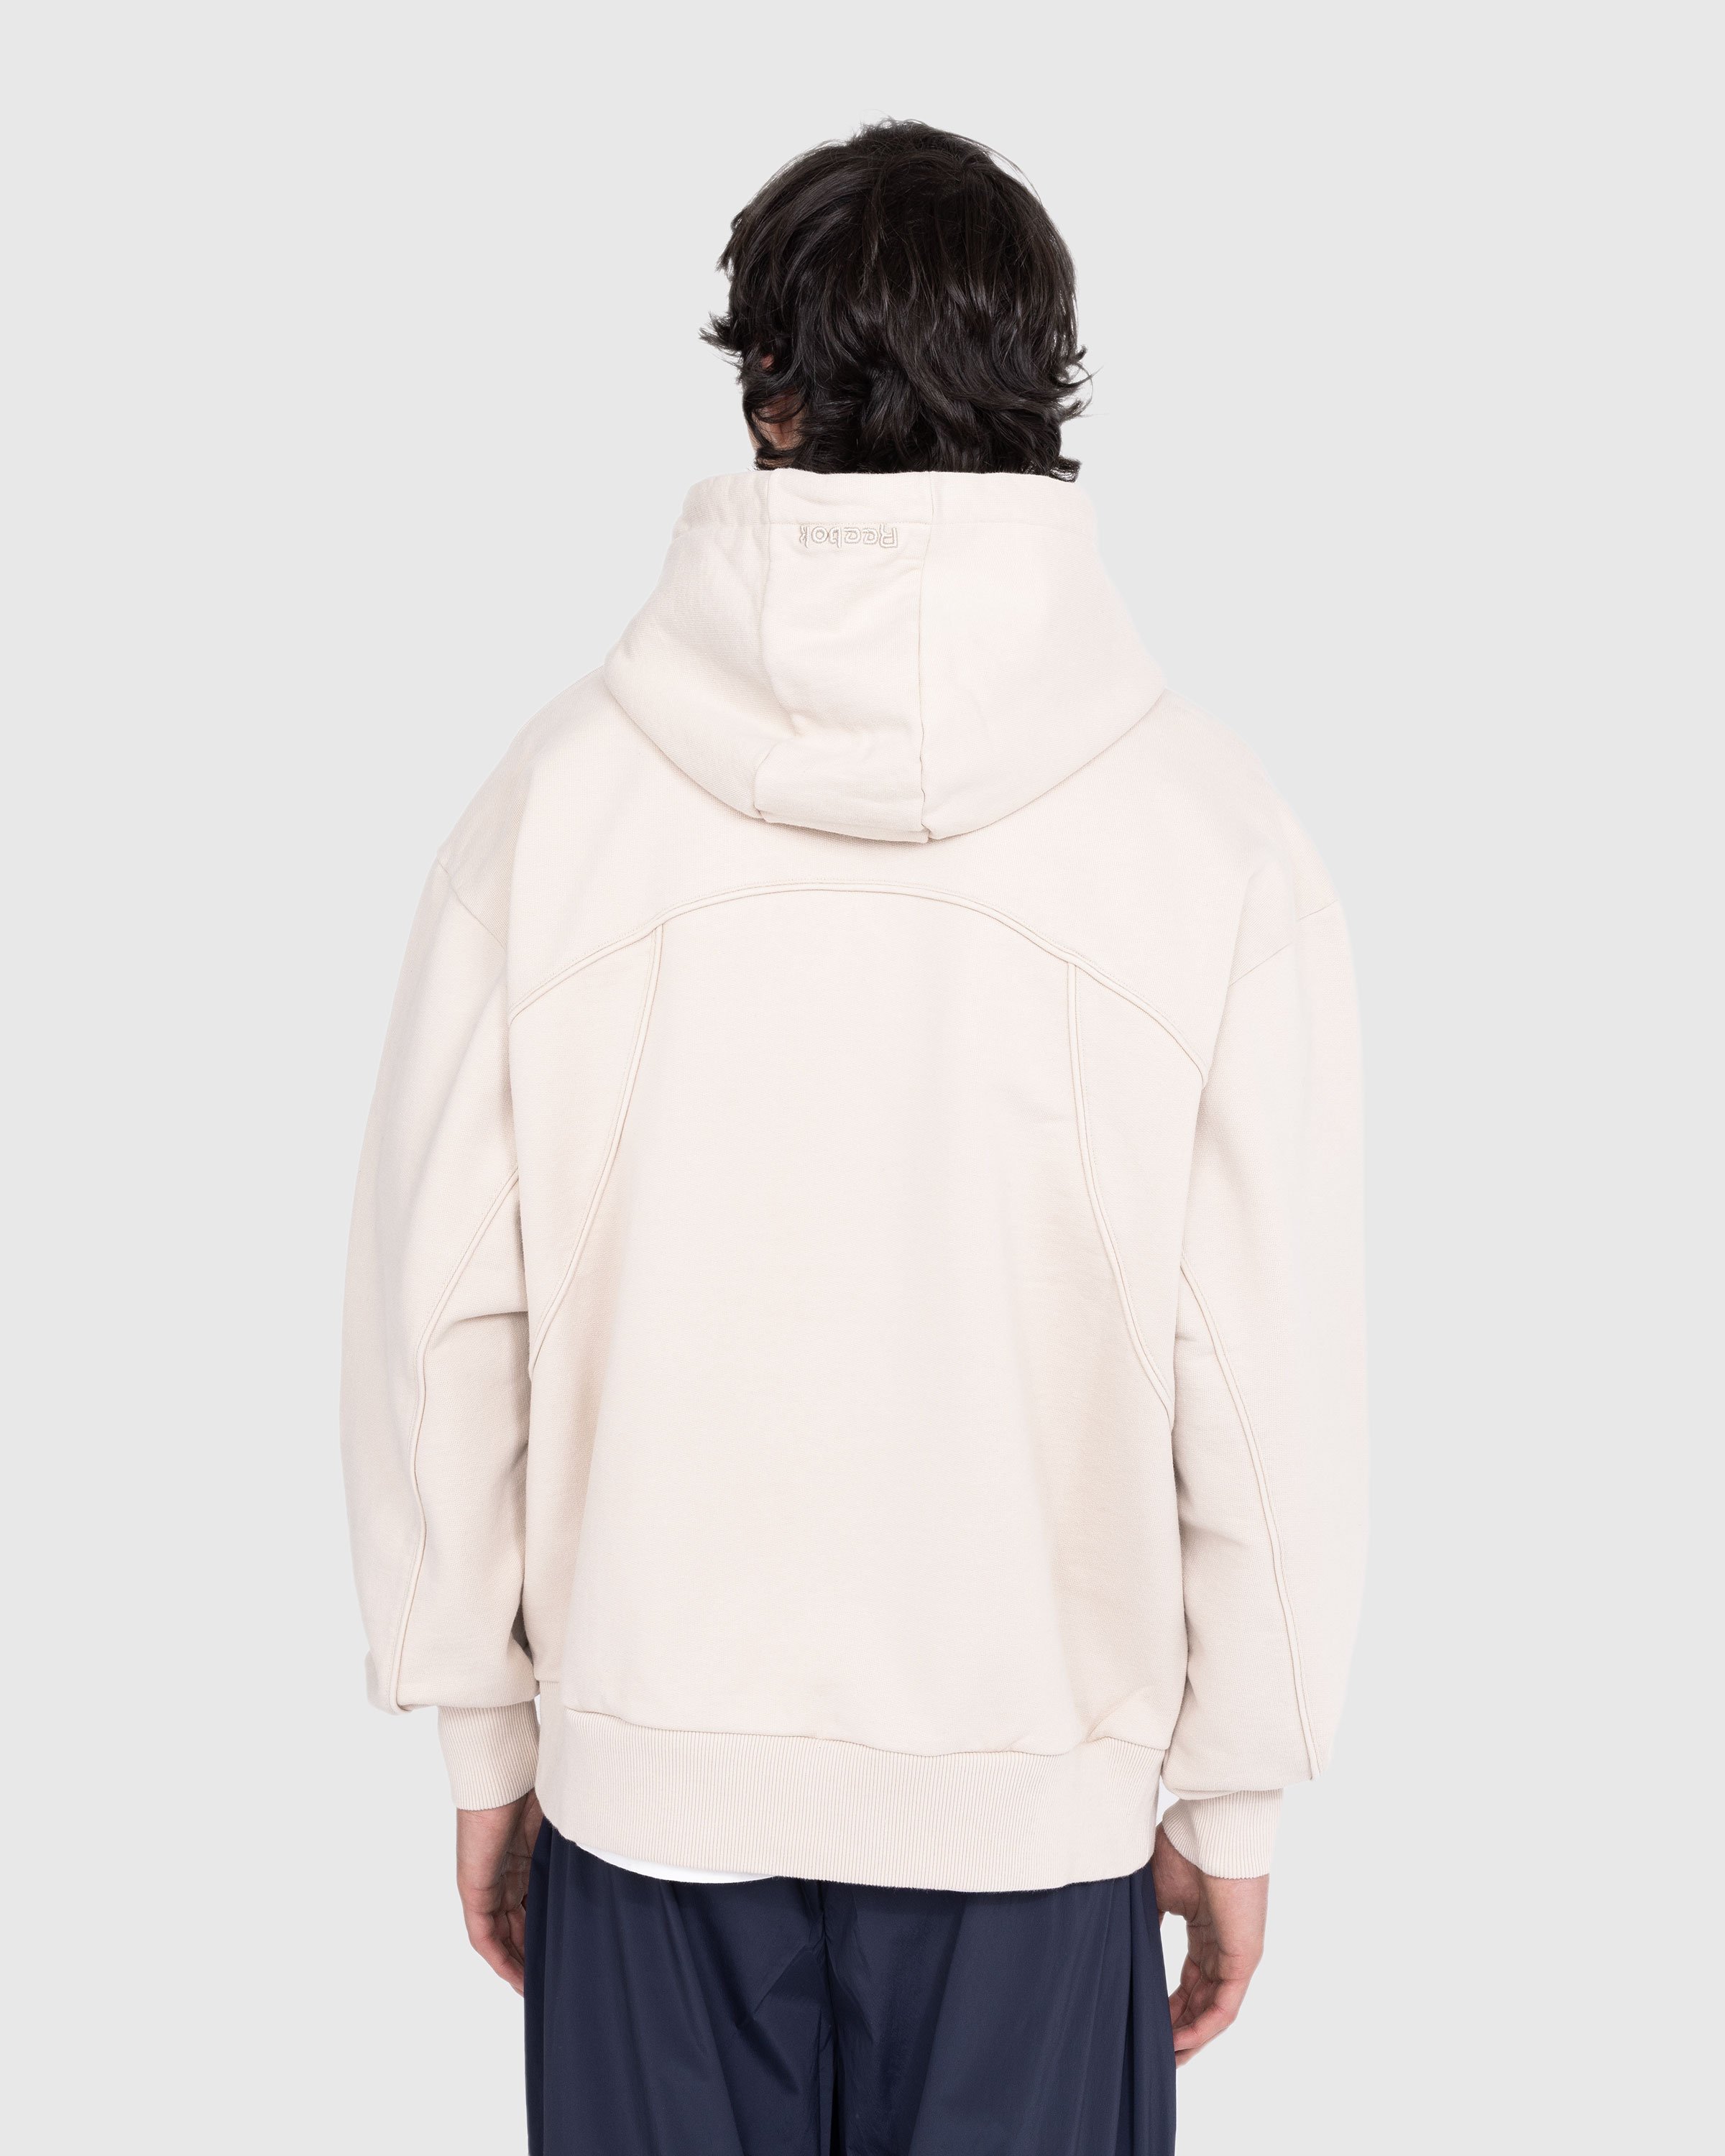 Reebok - Oversized Piped Hoodie Sand - Clothing - Beige - Image 3